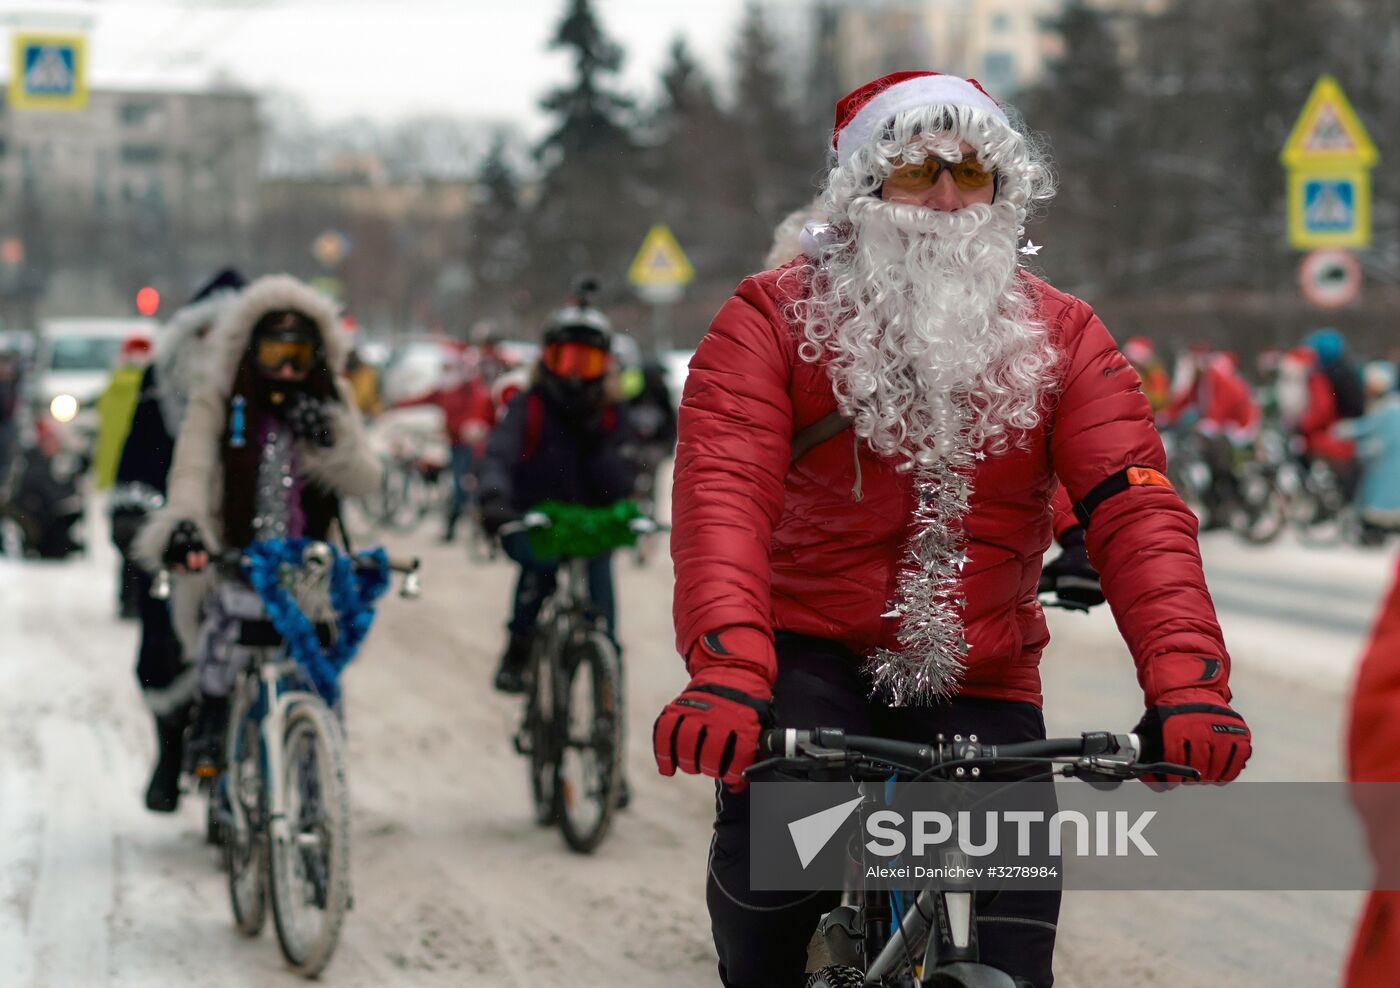 Grandfather Frost bike parade in St. Petersburg